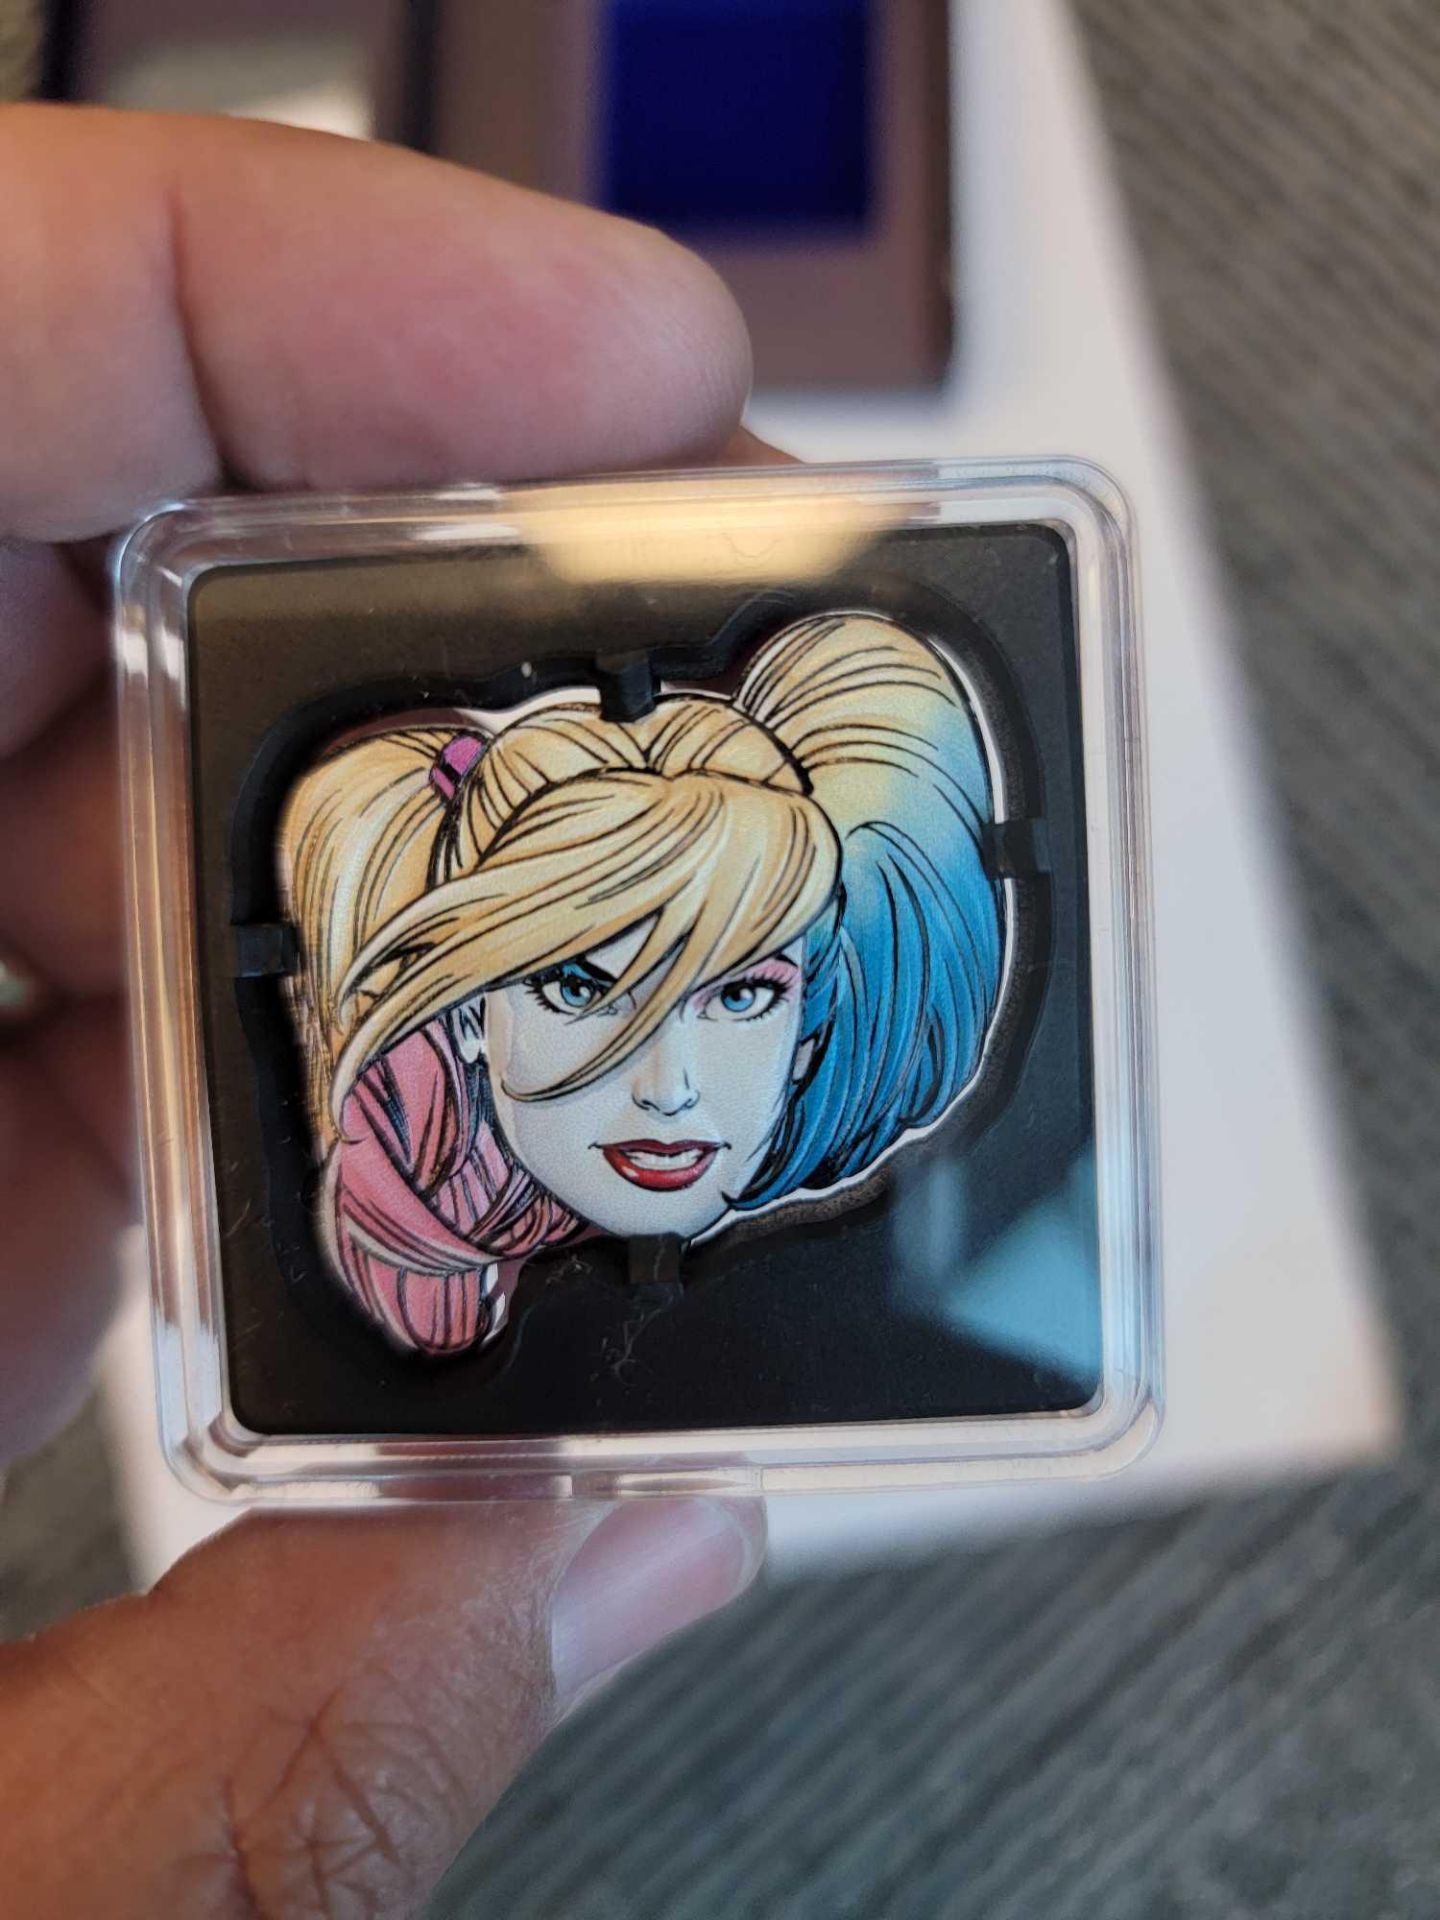 Faces of Gotham - Harley Quinn 1 oz Silver Collectible Coin - Image 7 of 12